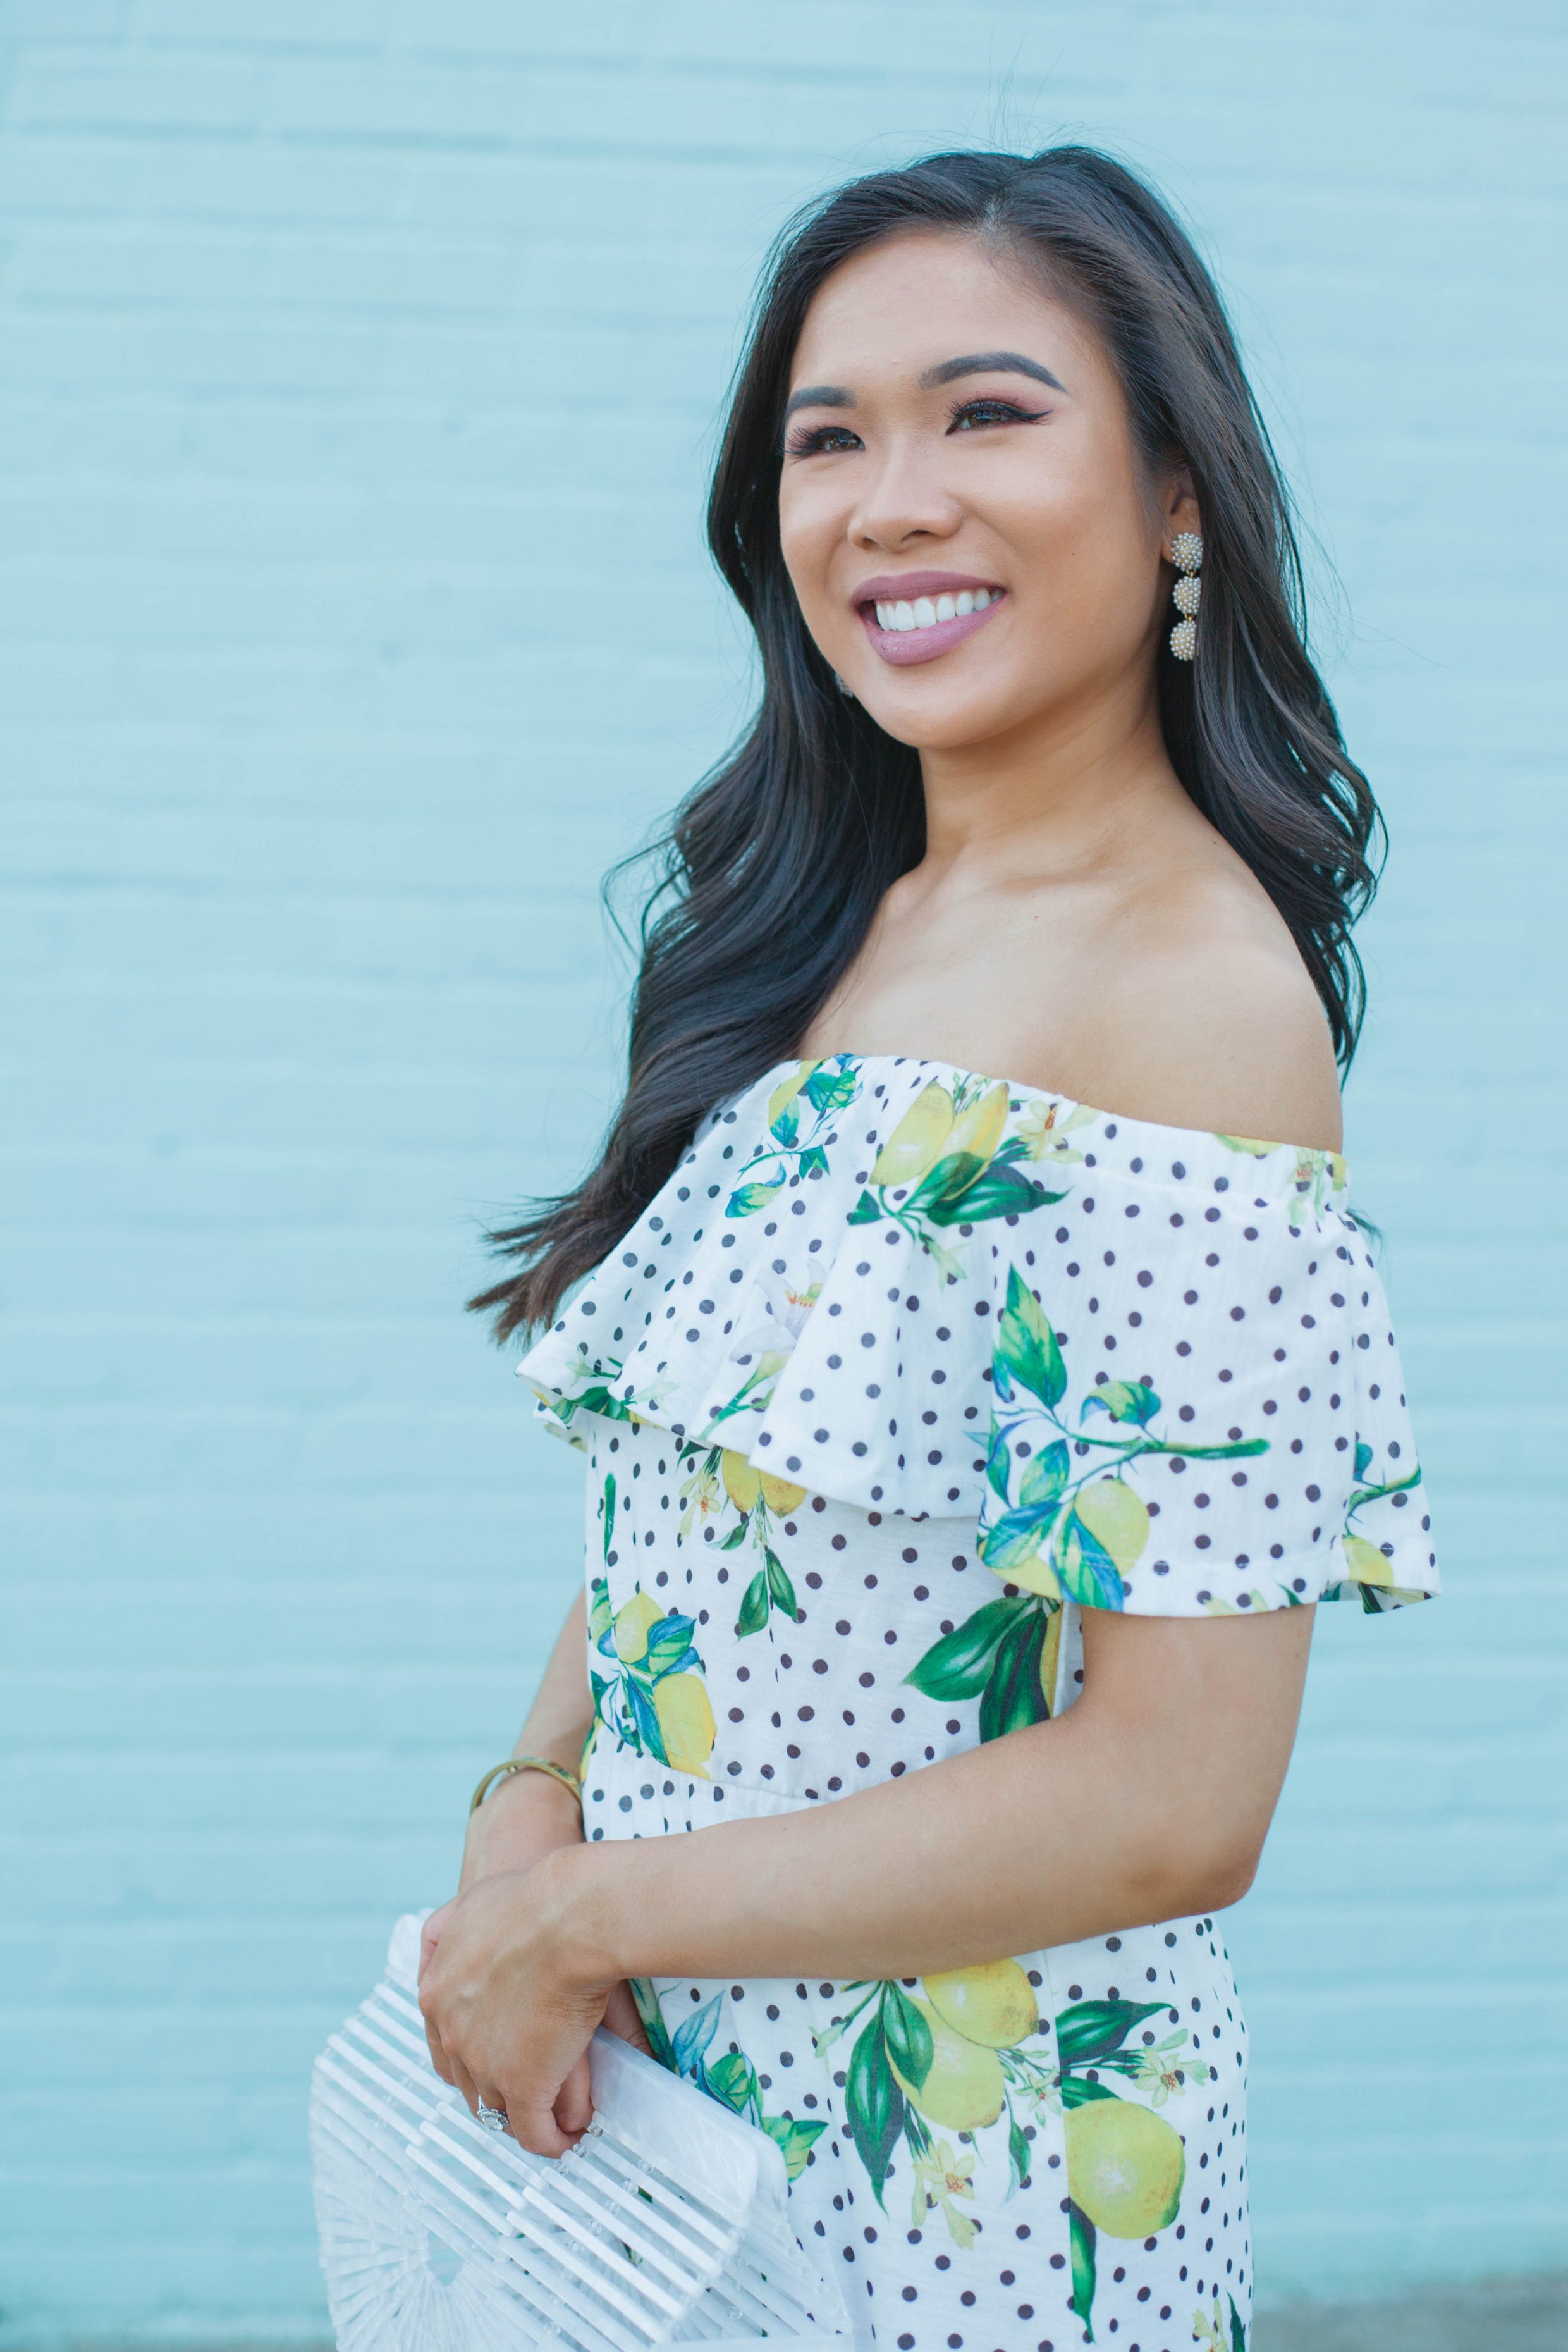 Hoang-Kim wears an off the shoulder lemon print dress with olive + piper pearl drop earrings